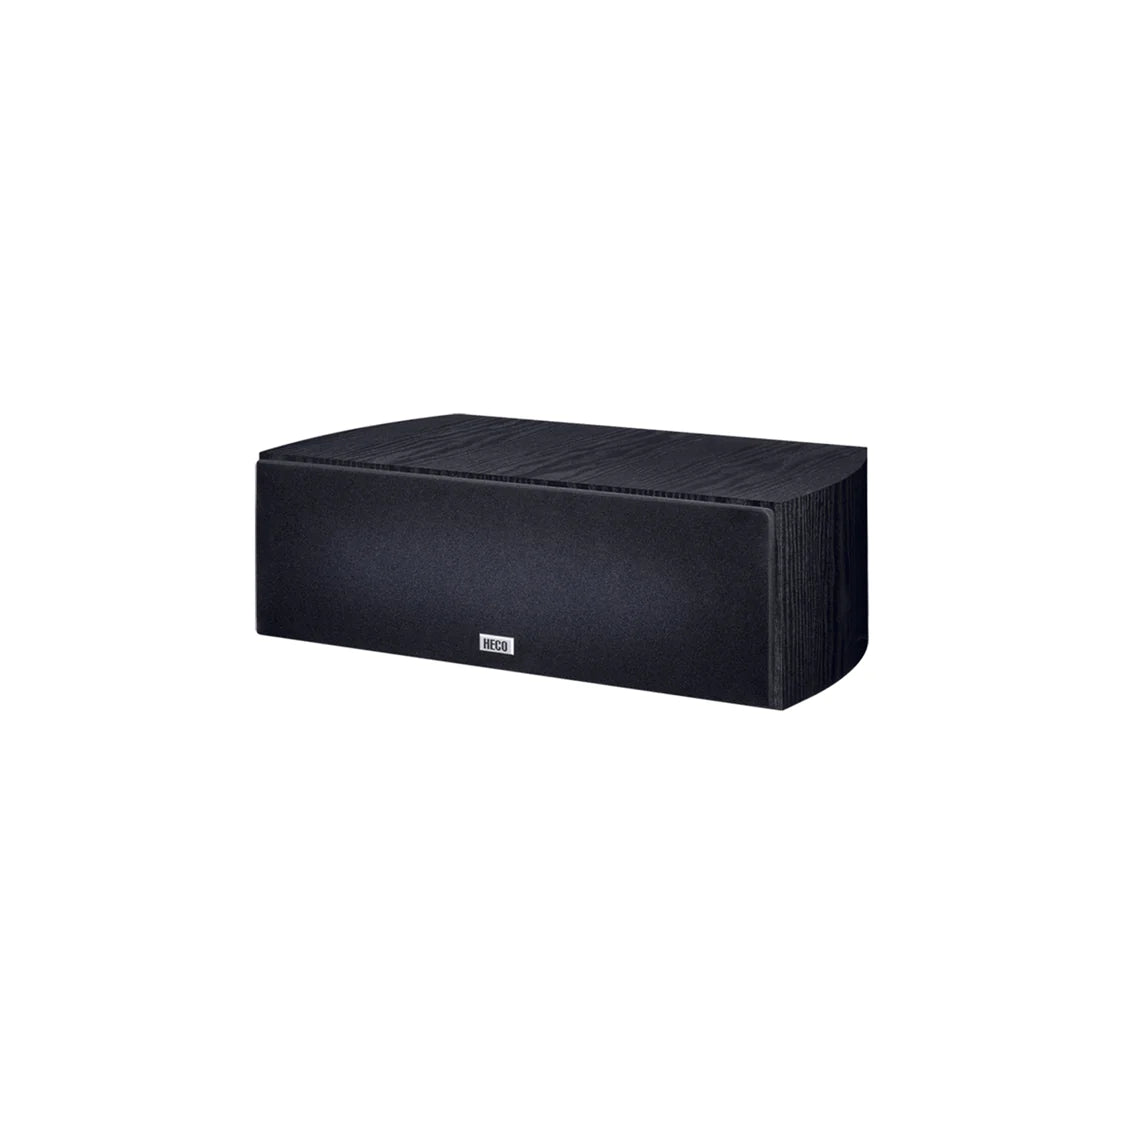 Heco Victa Prime 102 - Center Channel Speaker For Only Demo Piece